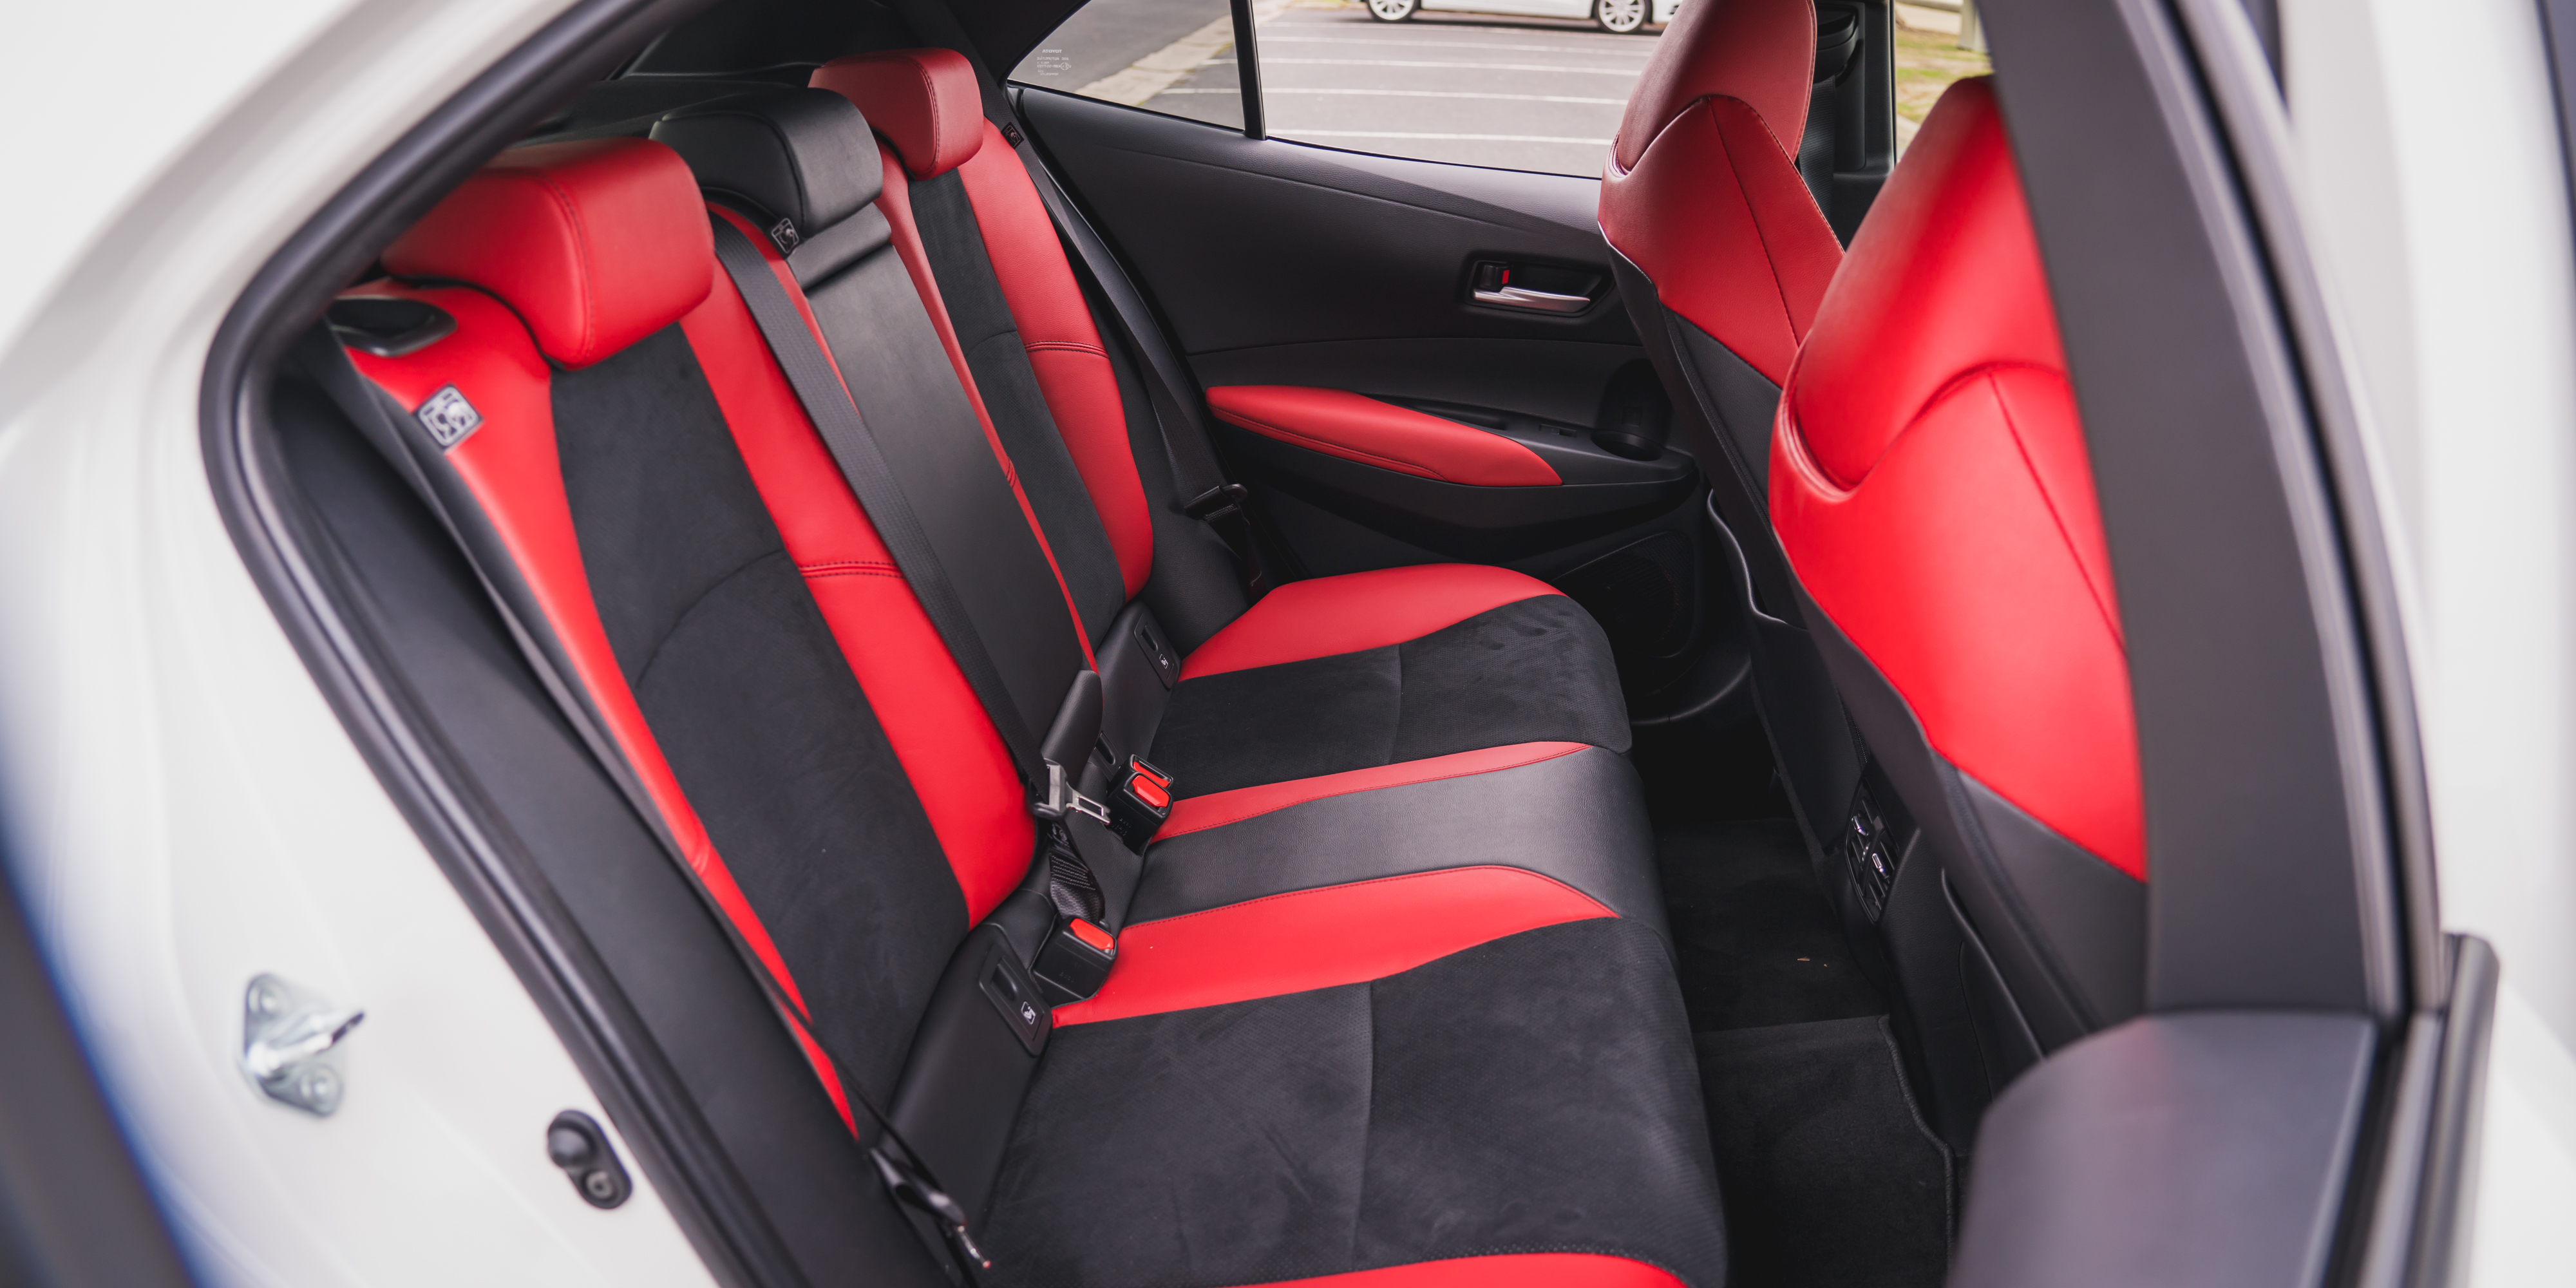 Car Seat Covers Cushions Black Red Car Seat Covers For